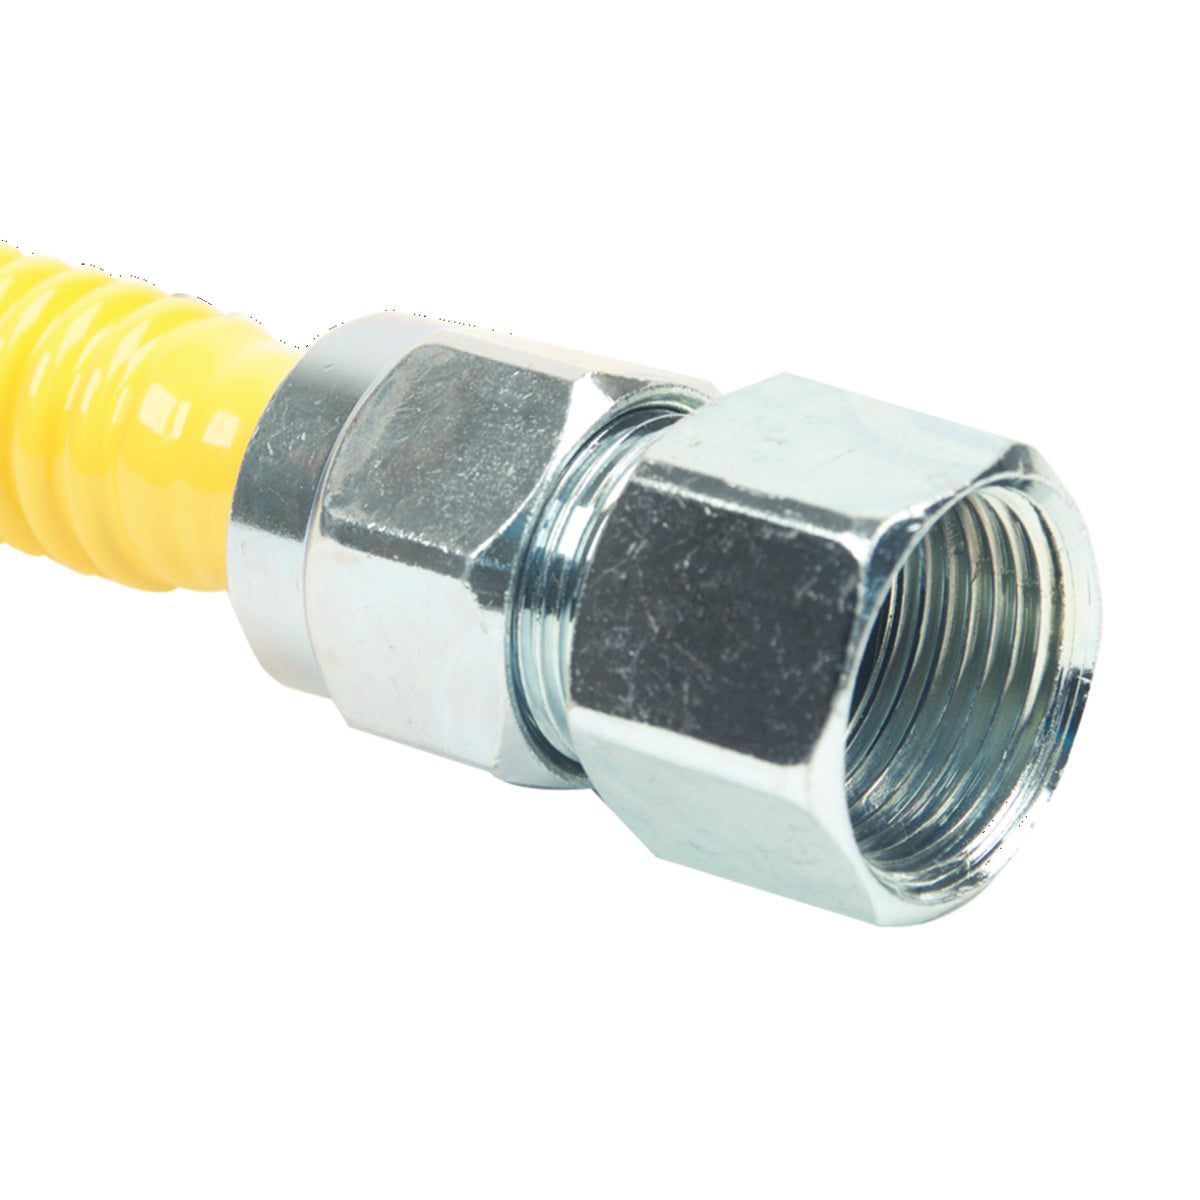 3/4" FIP x 3/4" FIP ProCoat Stainless Steel Gas Connector with Ball Valve